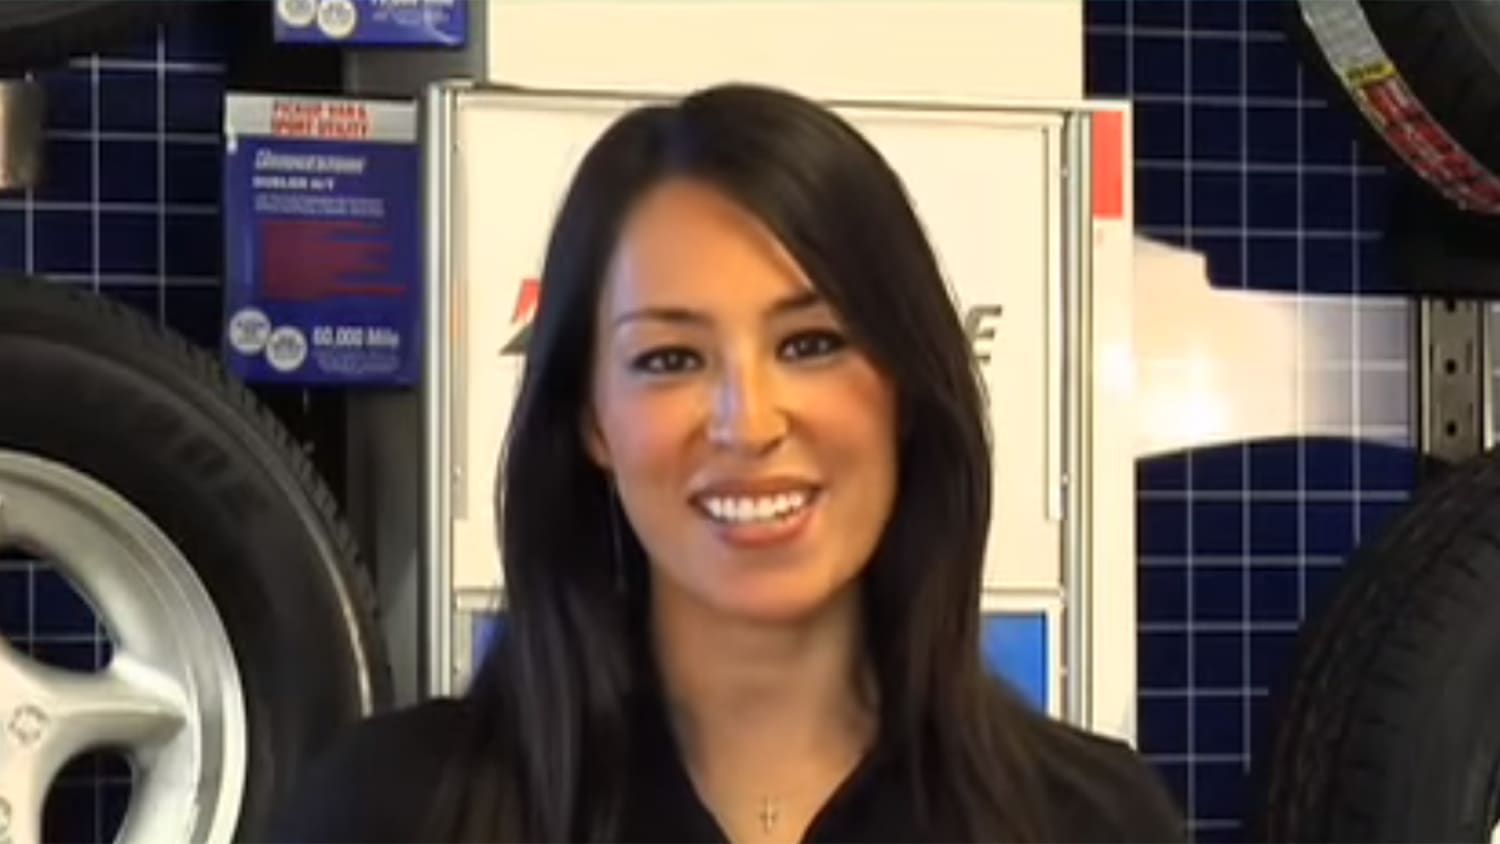 Watch Joanna Gaines get her TV start in a tire commercial.